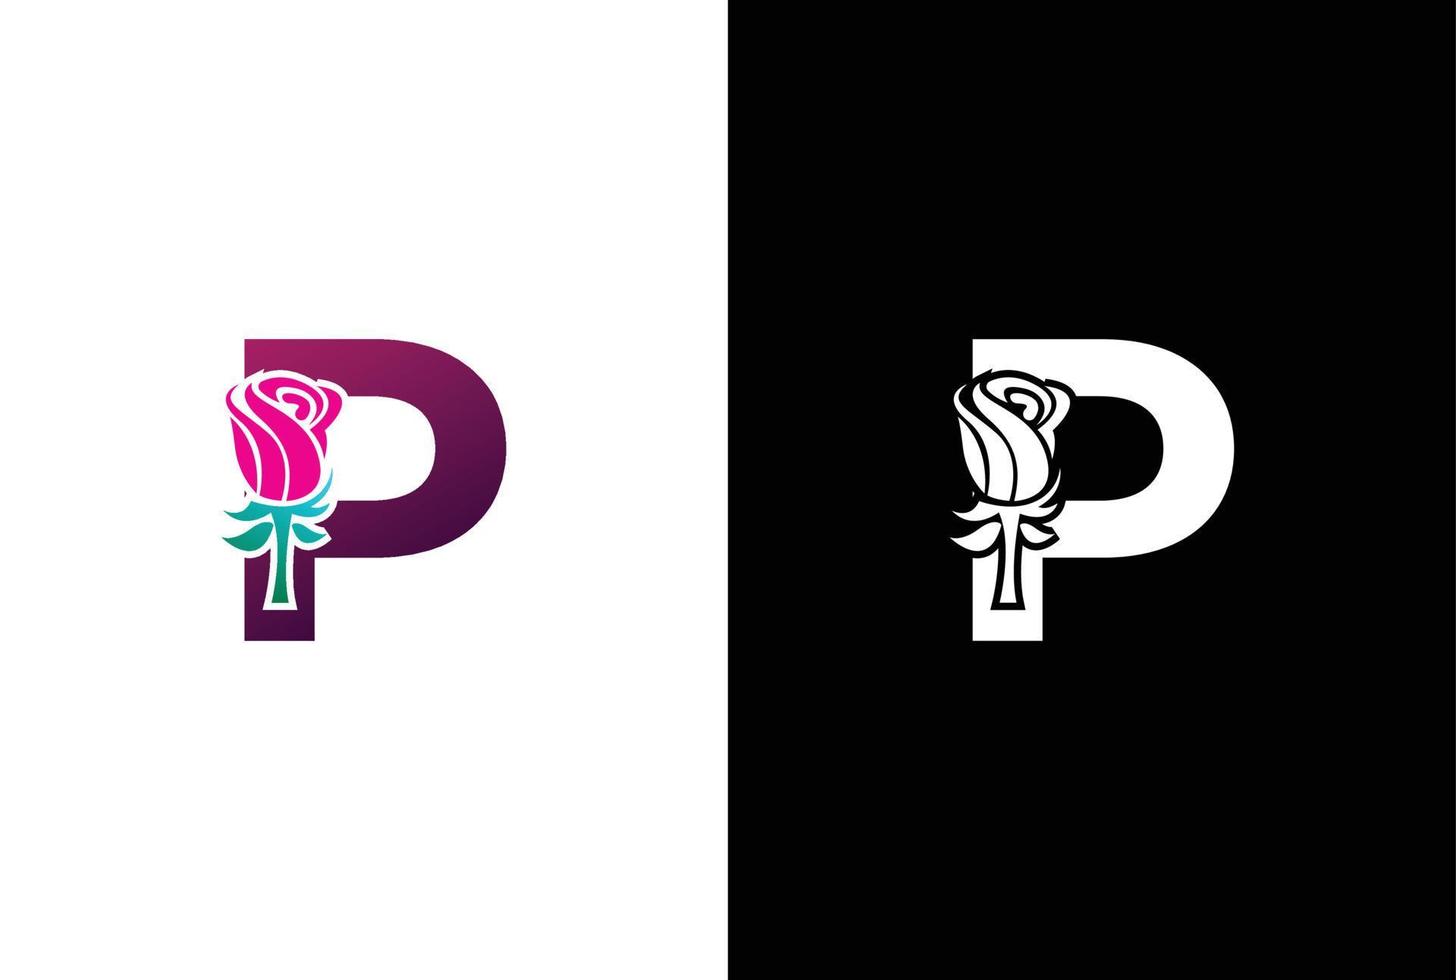 Illustration Beauty Rose with letter P sign logo vector design template. Letter P with rose for beauty and fashion.